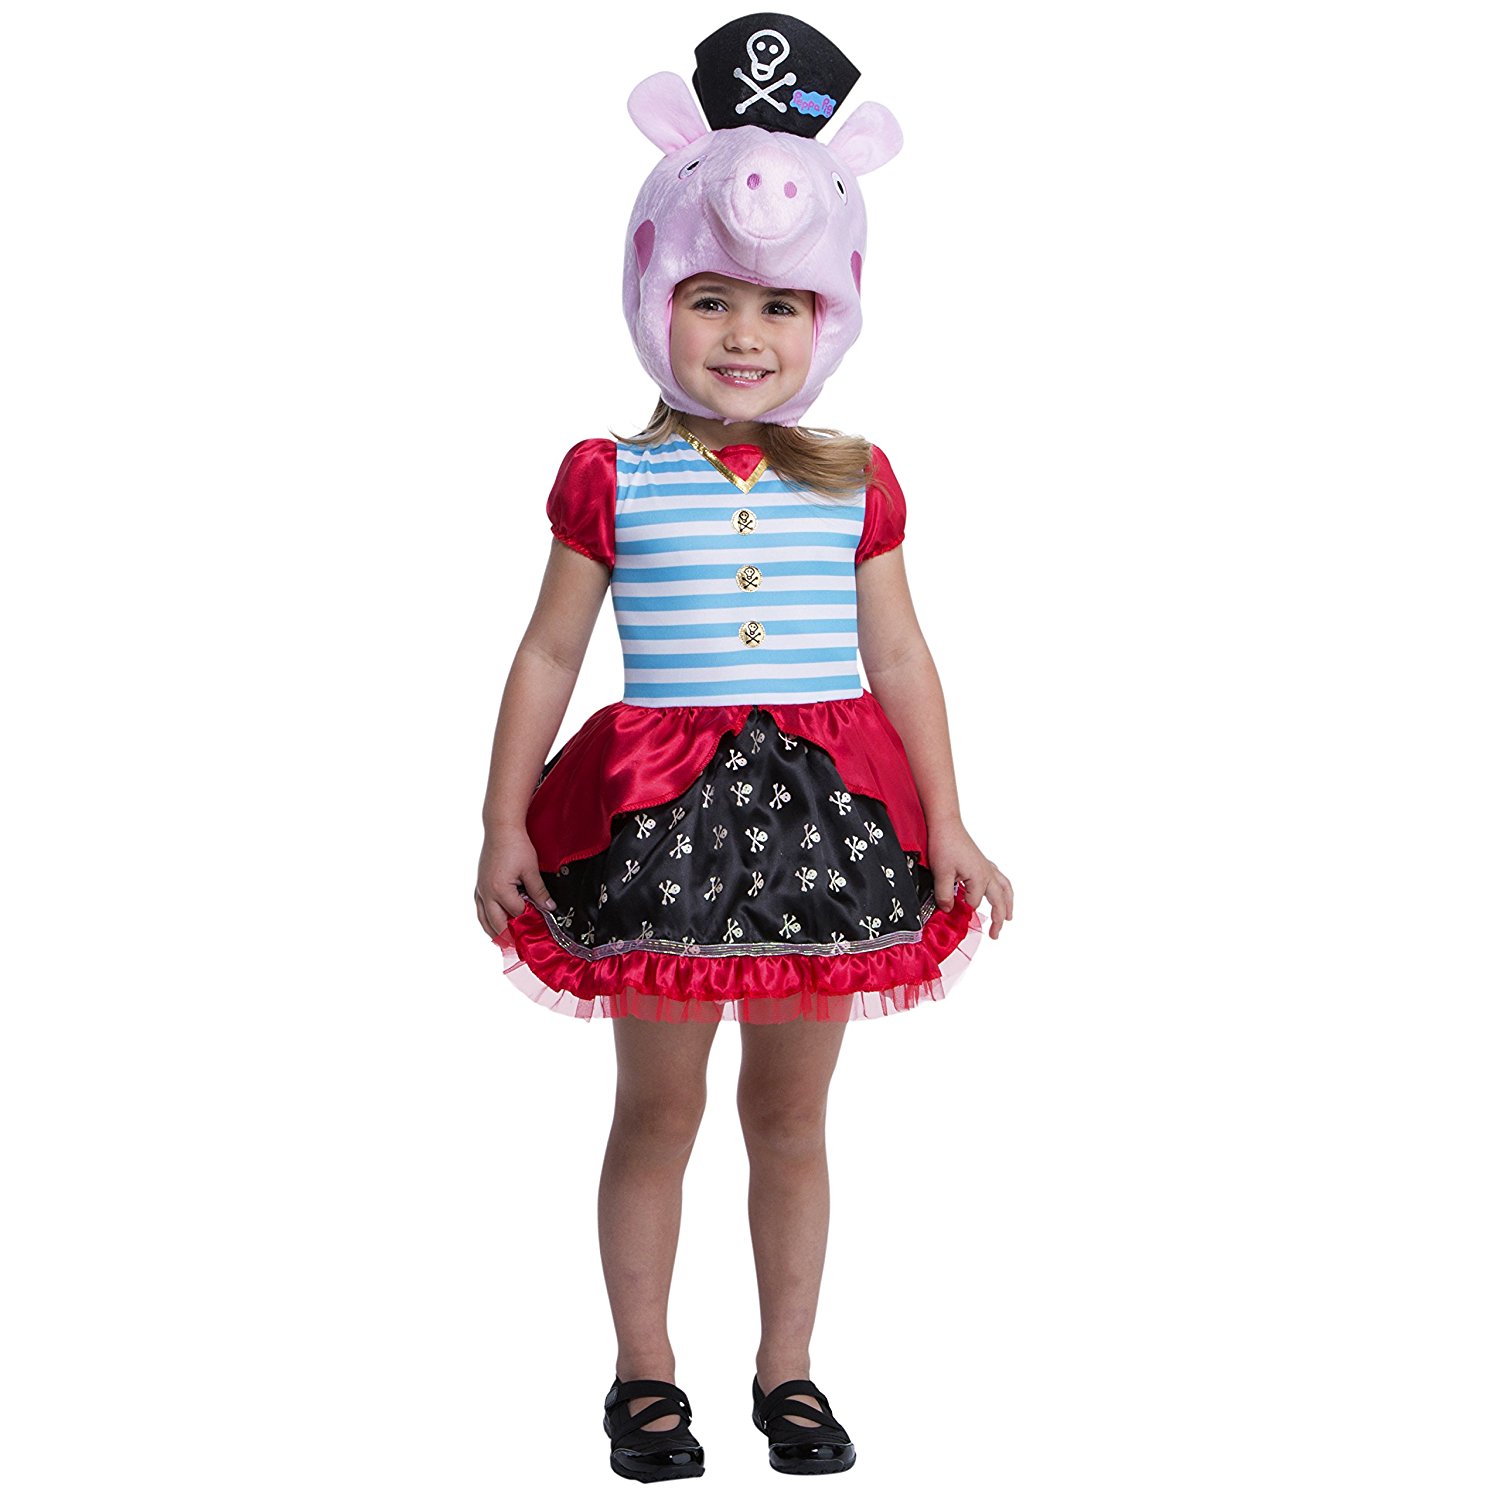 Peppa Pig Pirate Costume For Toodlers (3T - 4T)